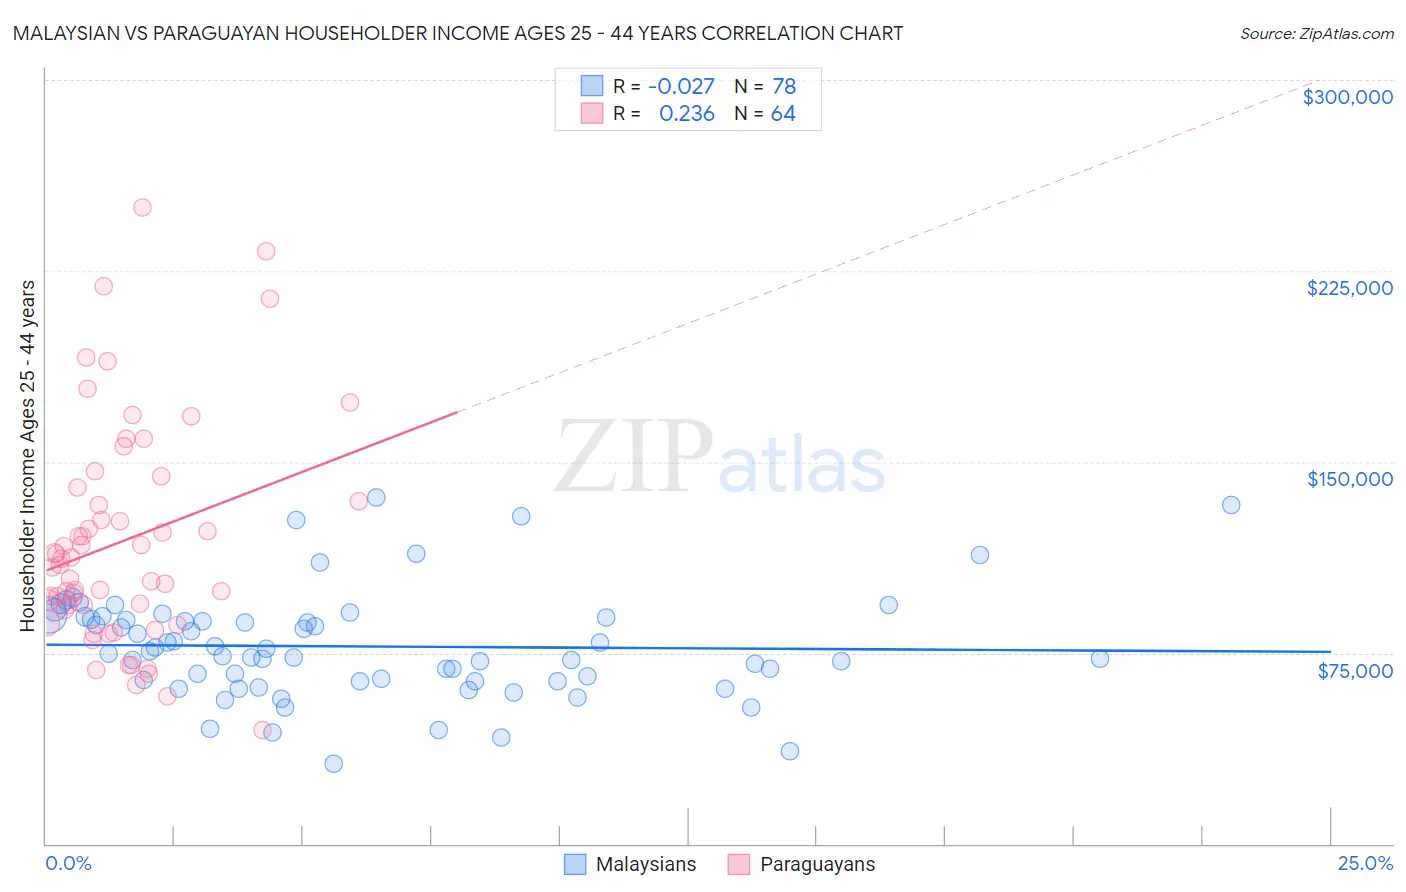 Malaysian vs Paraguayan Householder Income Ages 25 - 44 years